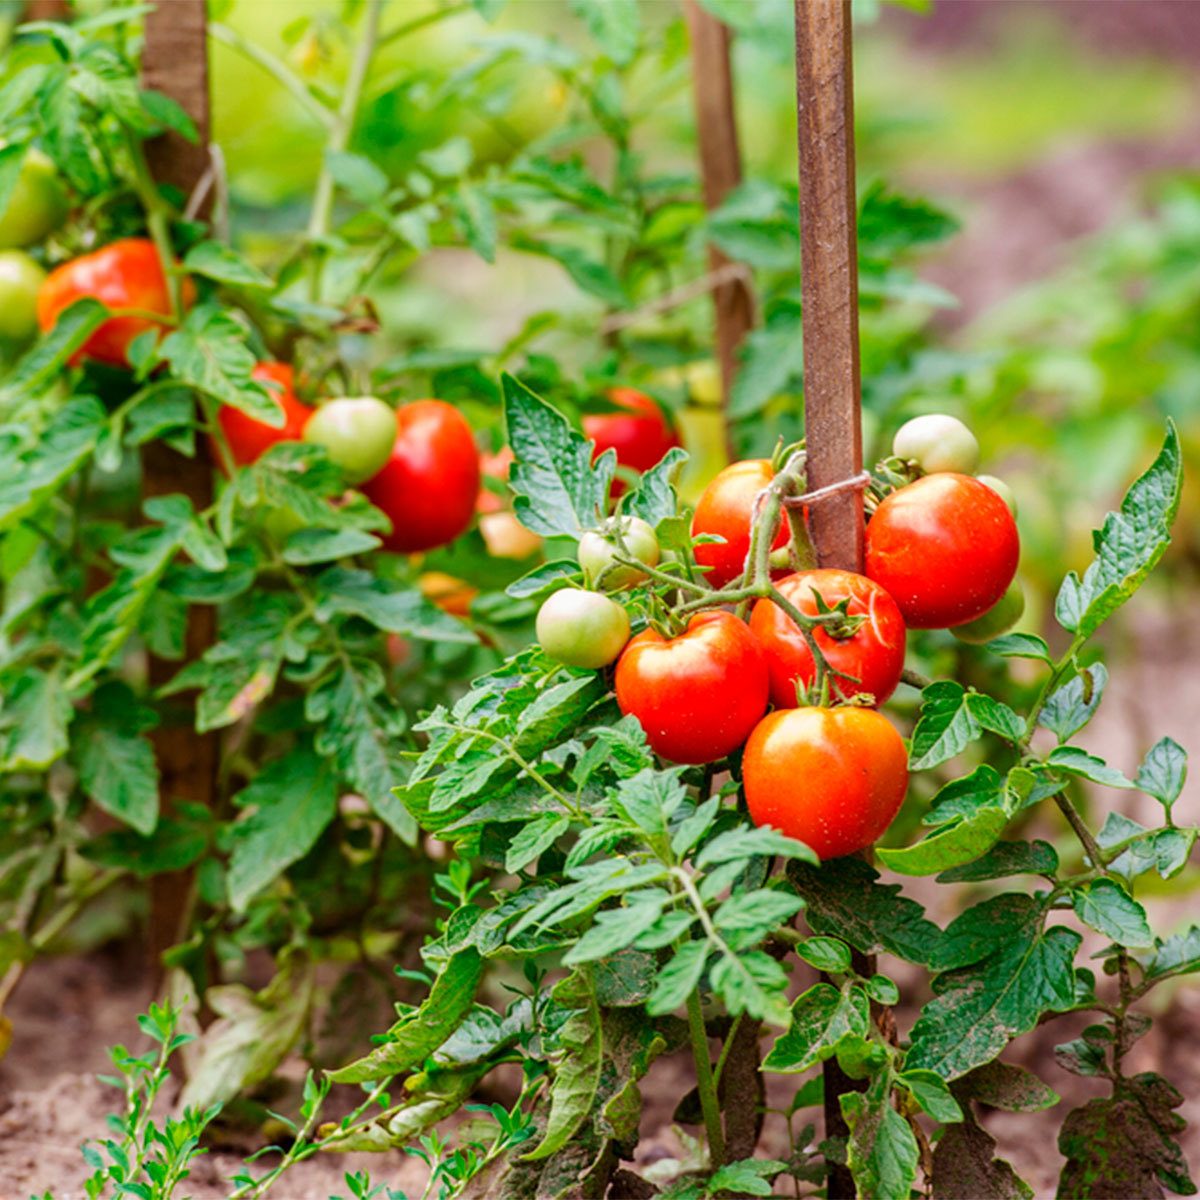 Five Ways To Grow Tomatoes The Family Handyman,Steam Carrots In Microwave